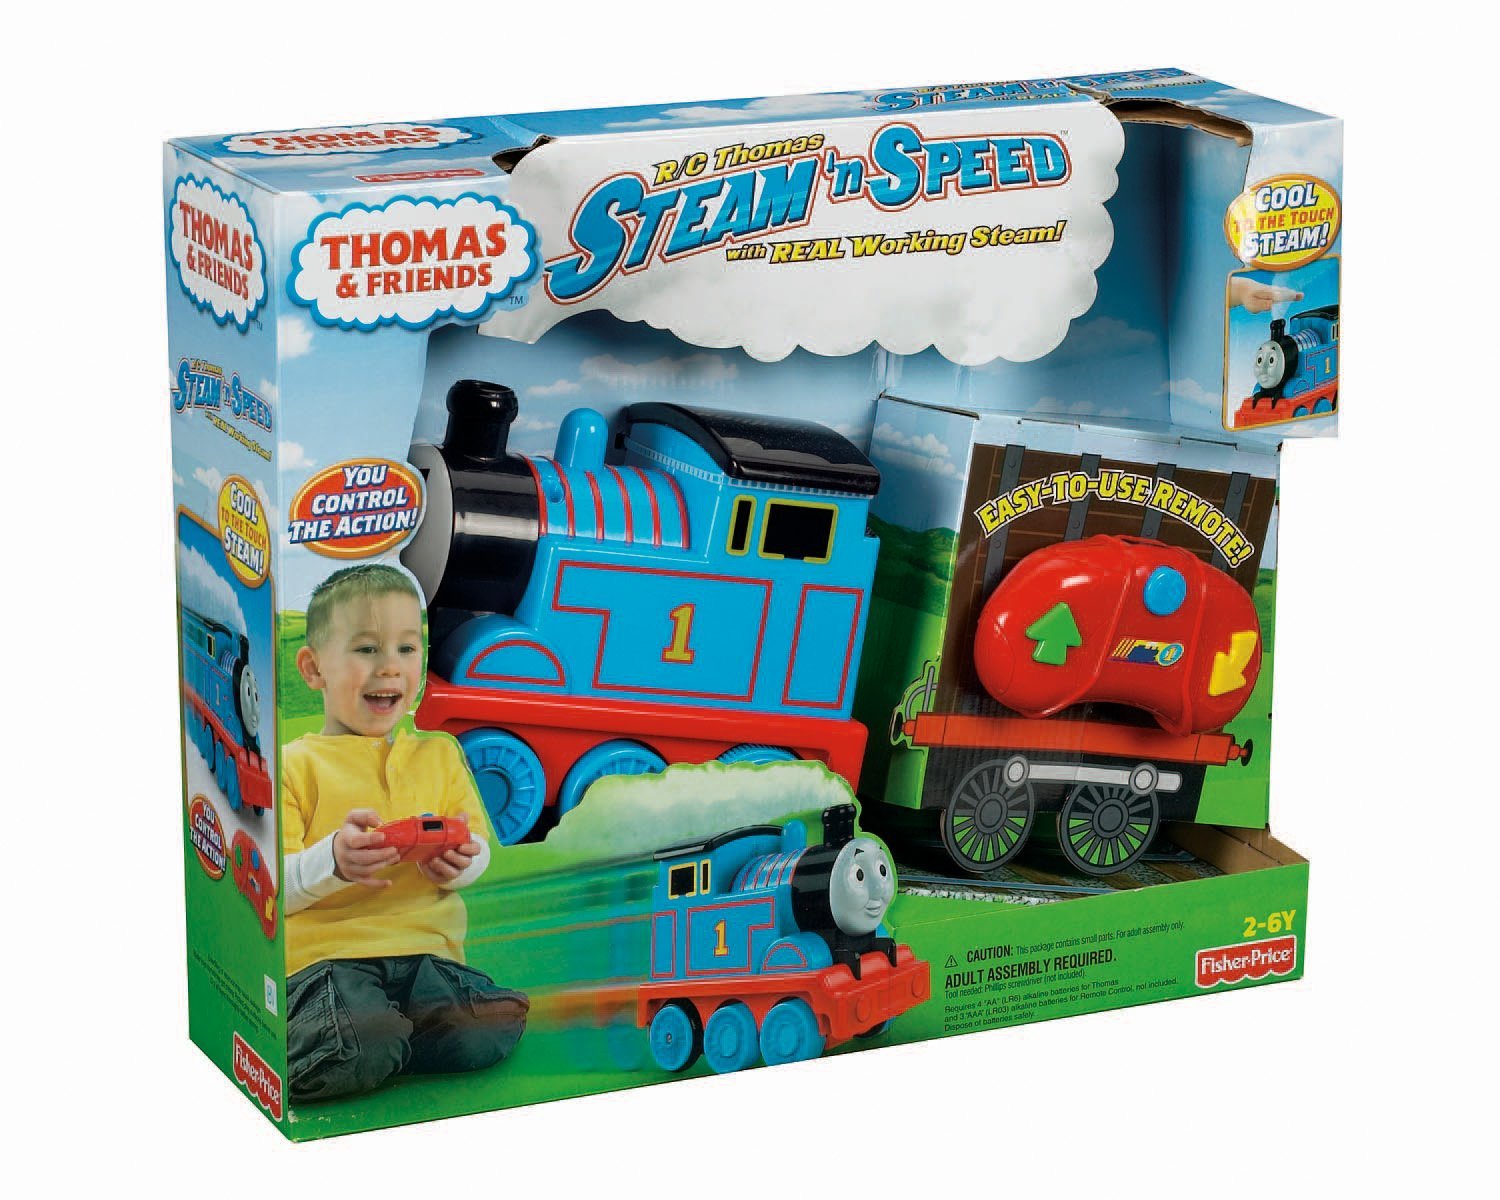 Controlling tom. Thomas friends Trackmaster r c Thomas. Remote Control Thomas. Train friends r1809.